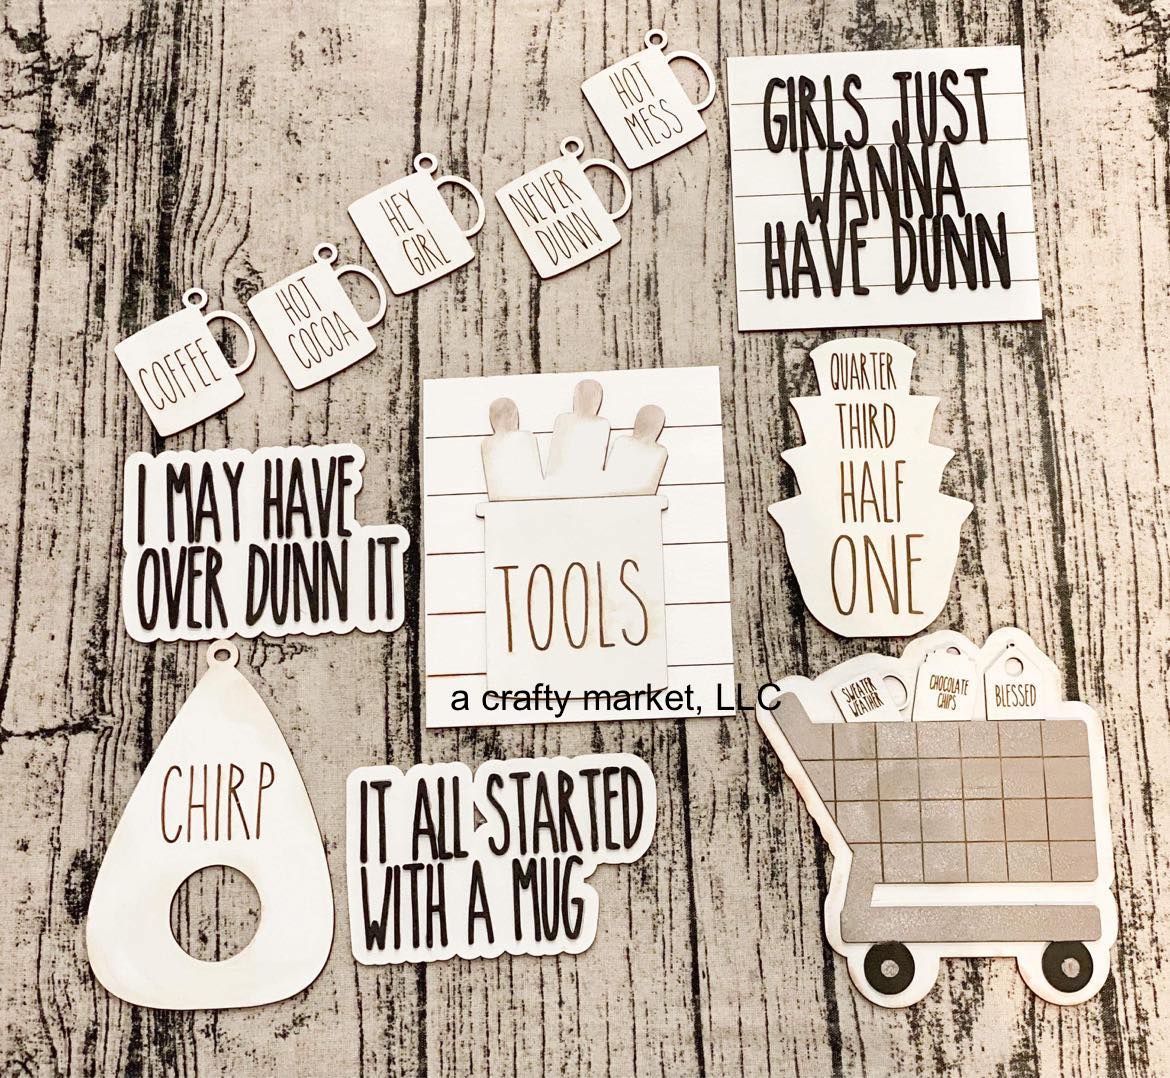 DIY Kit - Tiered Tray - Girls Just wanna have DUNN